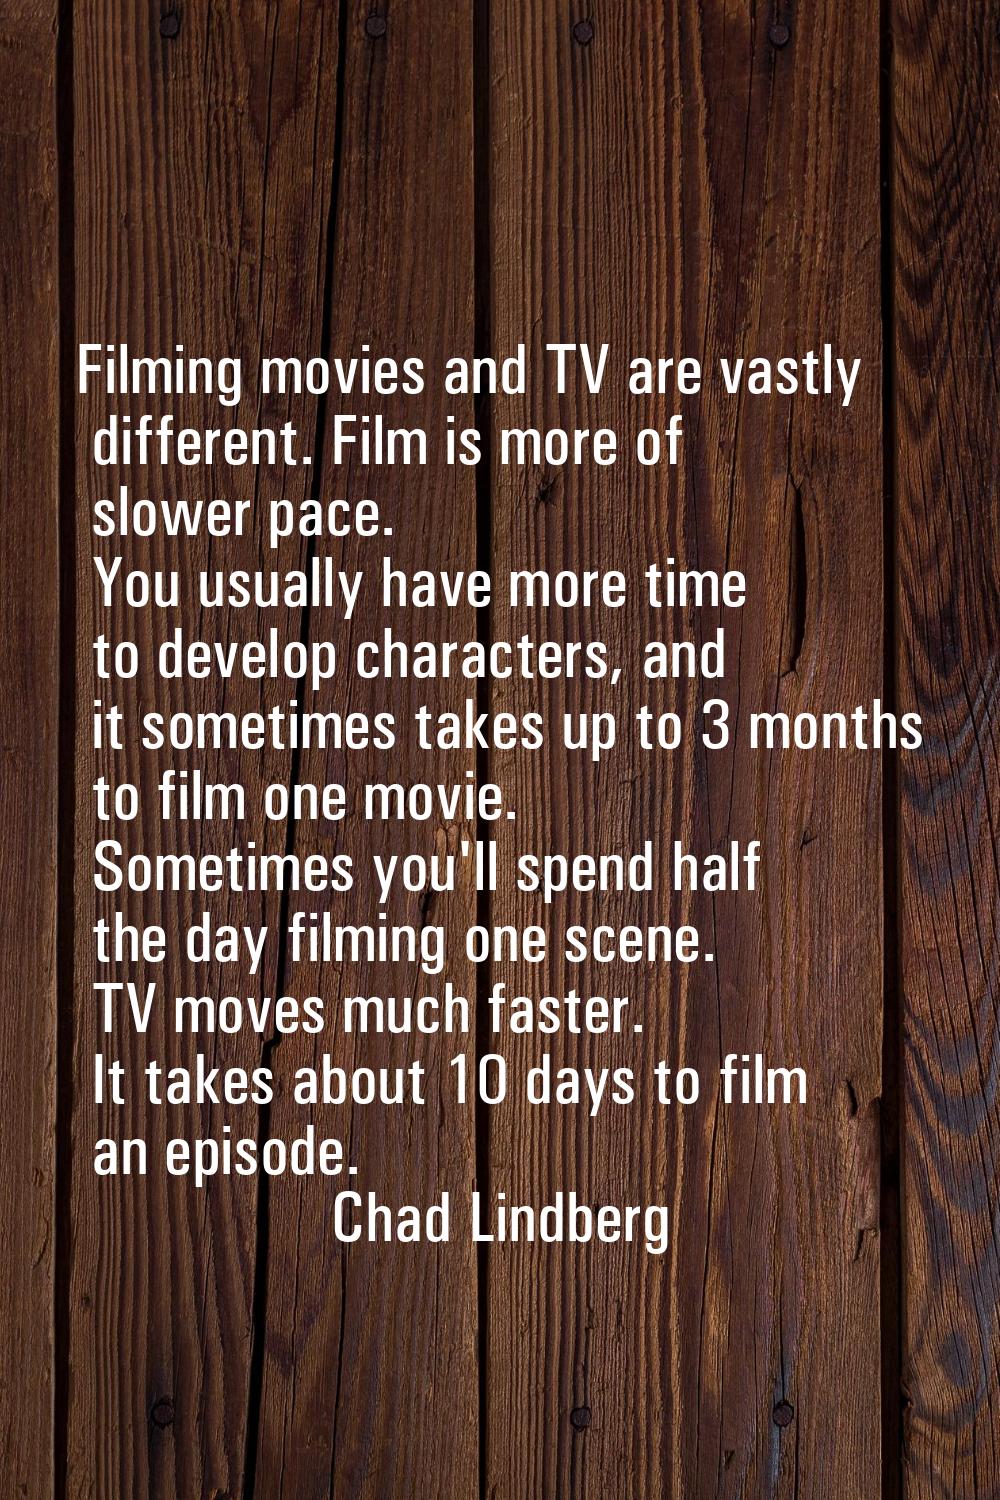 Filming movies and TV are vastly different. Film is more of slower pace. You usually have more time